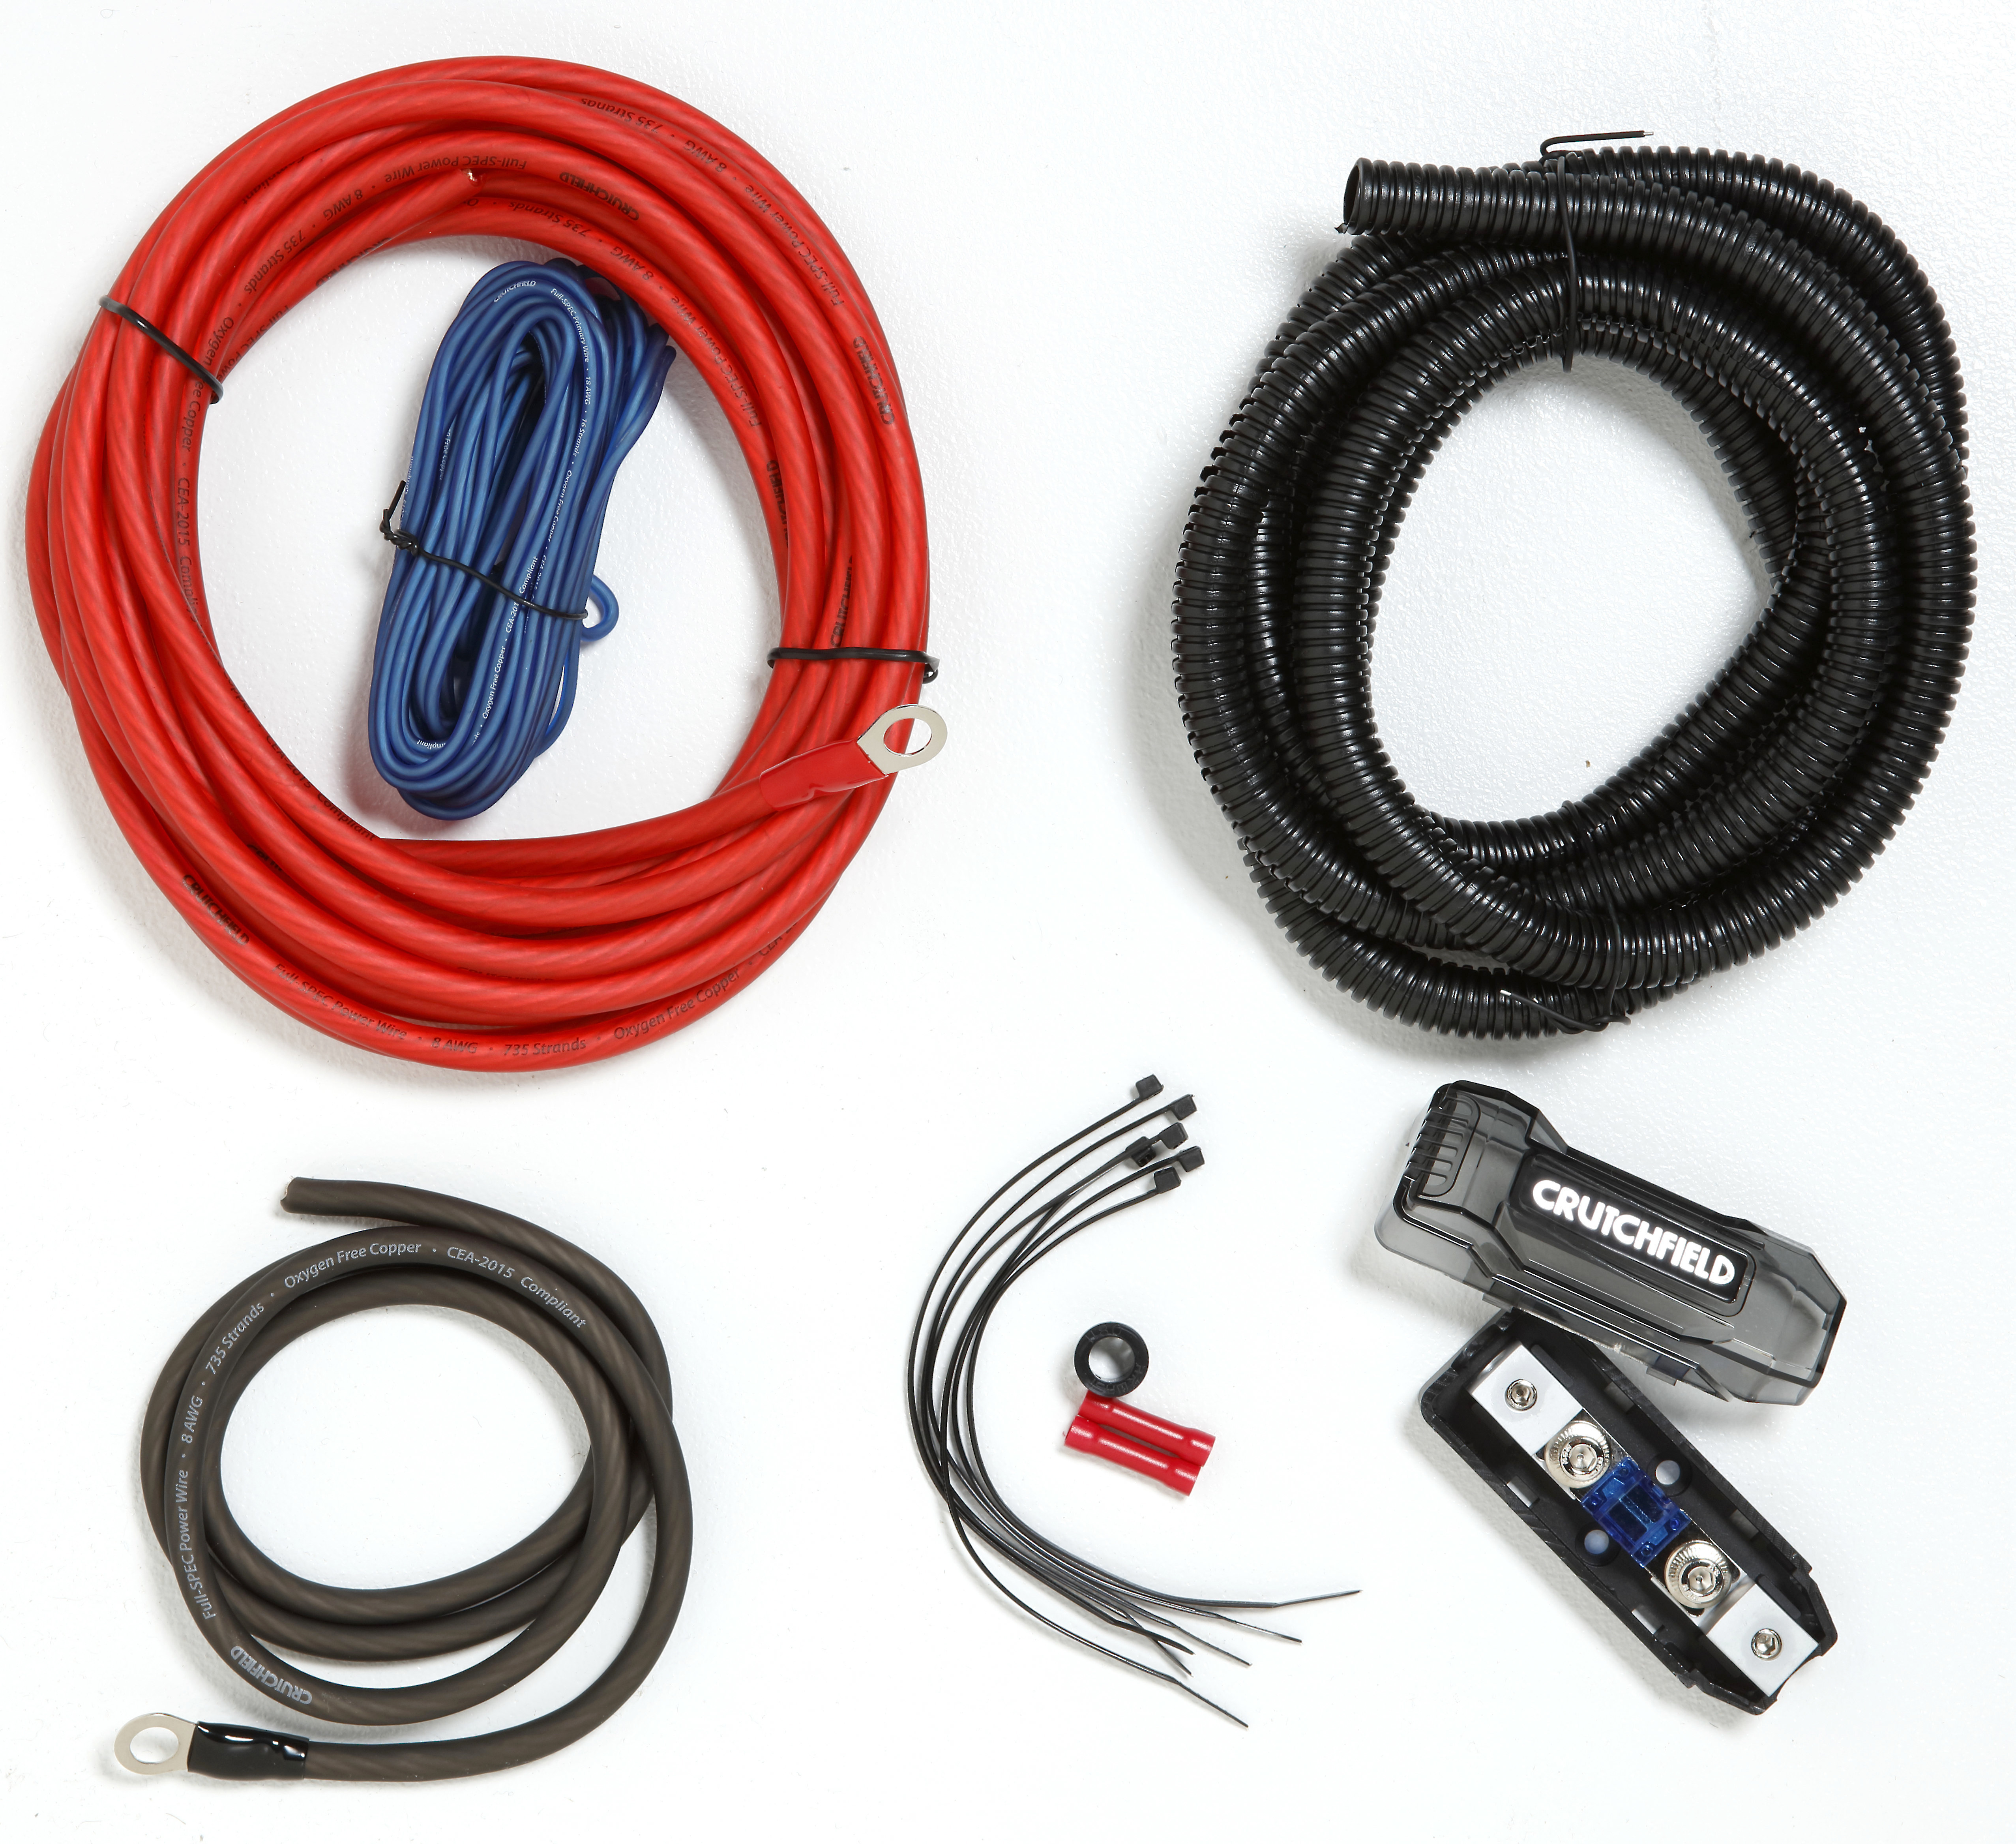 for Installer and DIY Hobbyist Complete 1500W Gravity 8 Gauge Amplifier Installation Wiring Kit Amp PK1 8 Ga Red Perfect for Car/Truck/Motorcycle/RV/ATV 